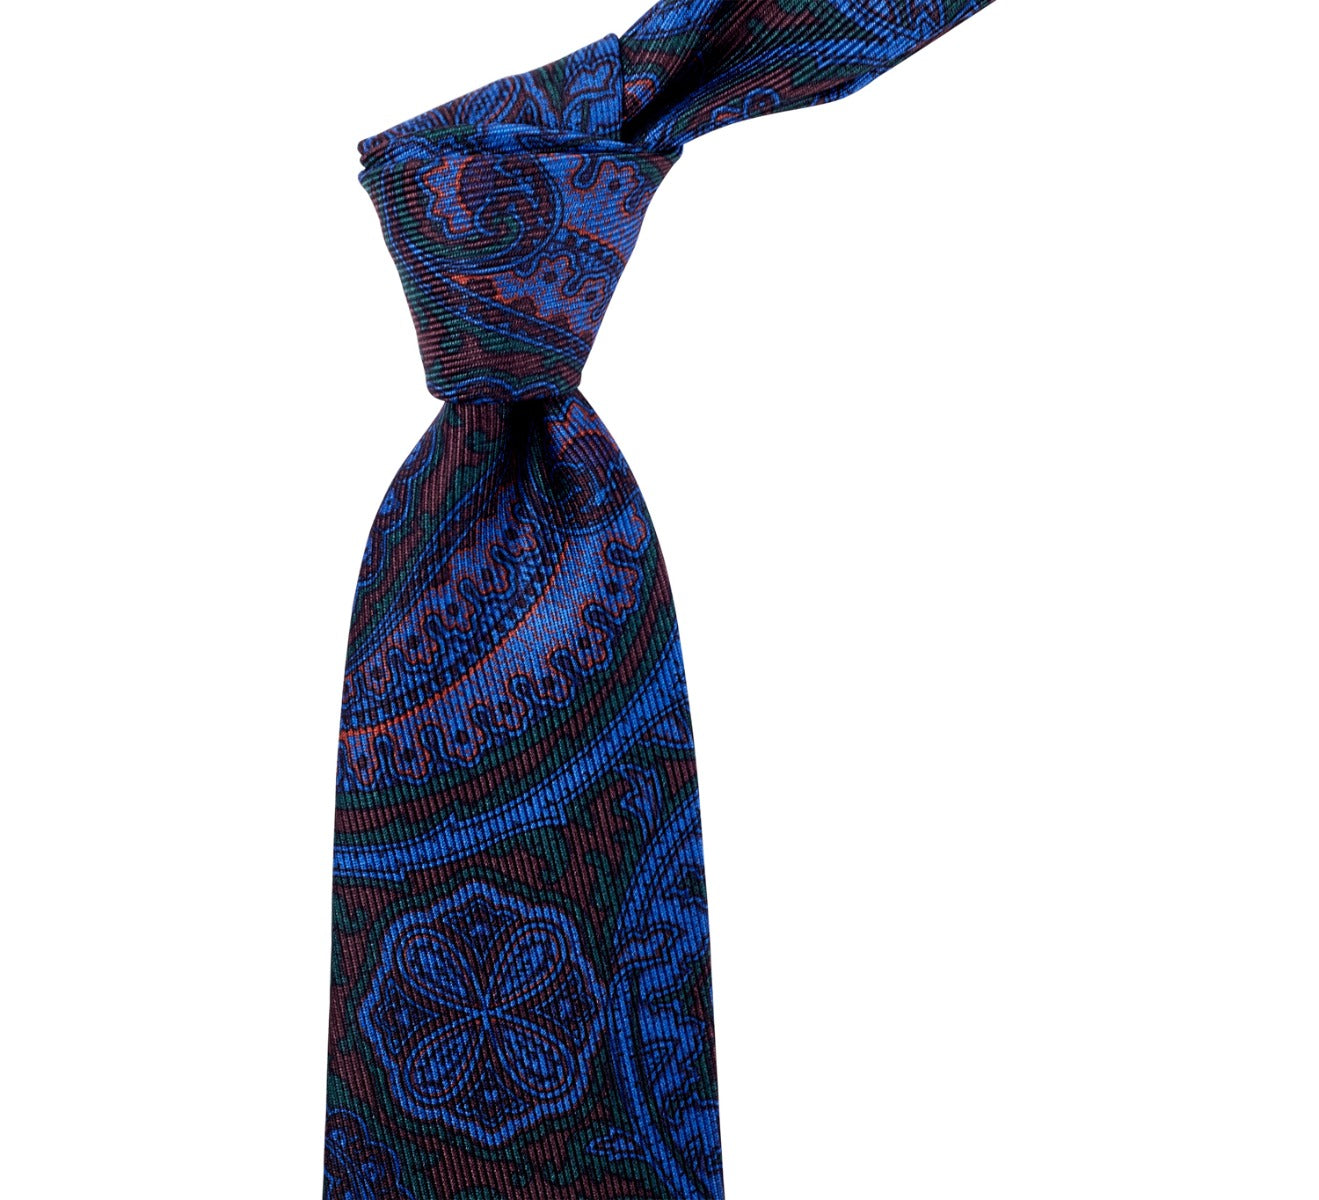 A high-quality Sovereign Grade Navy and Brown Paisley Ancient Madder Silk Tie by KirbyAllison.com on a white background.